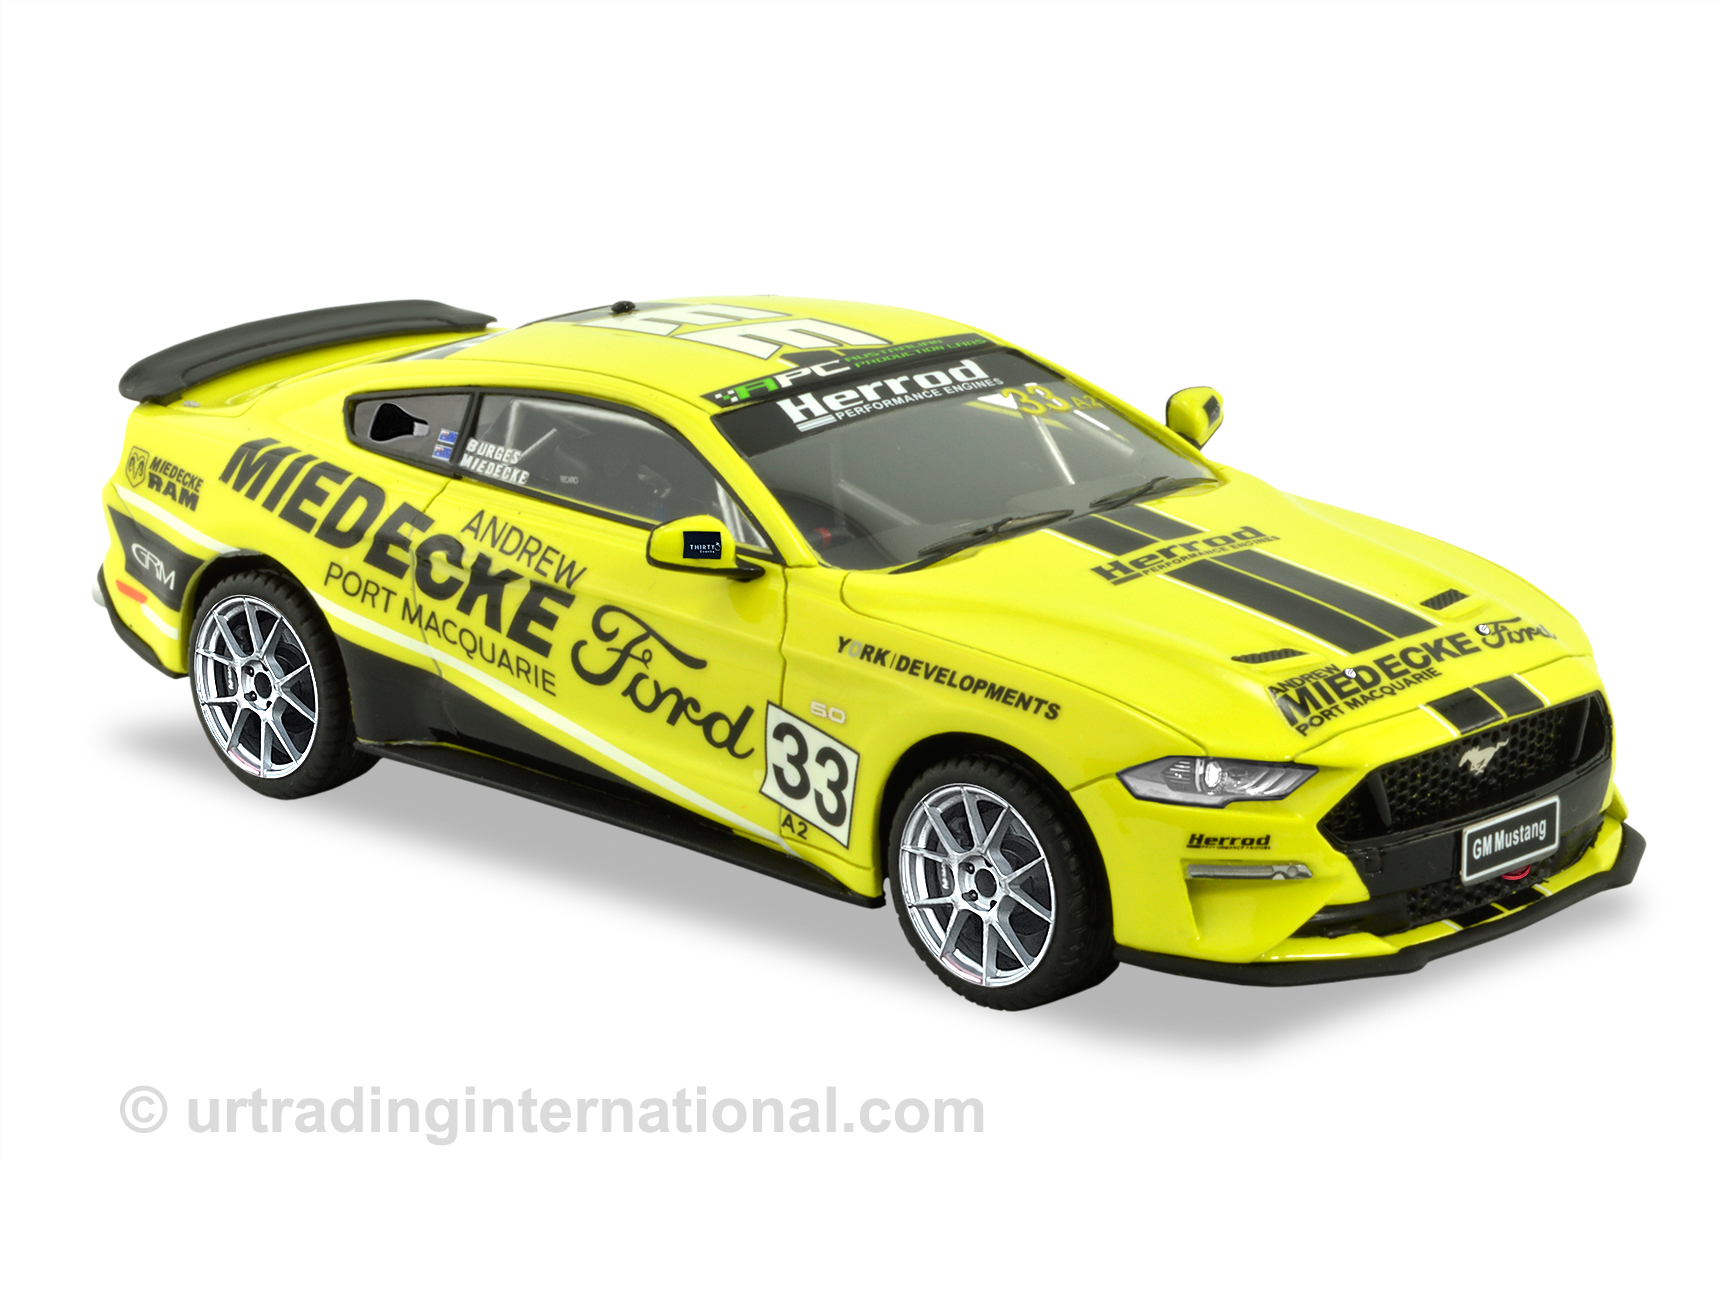 2021 Ford Mustang Racing Car – George Miedecke